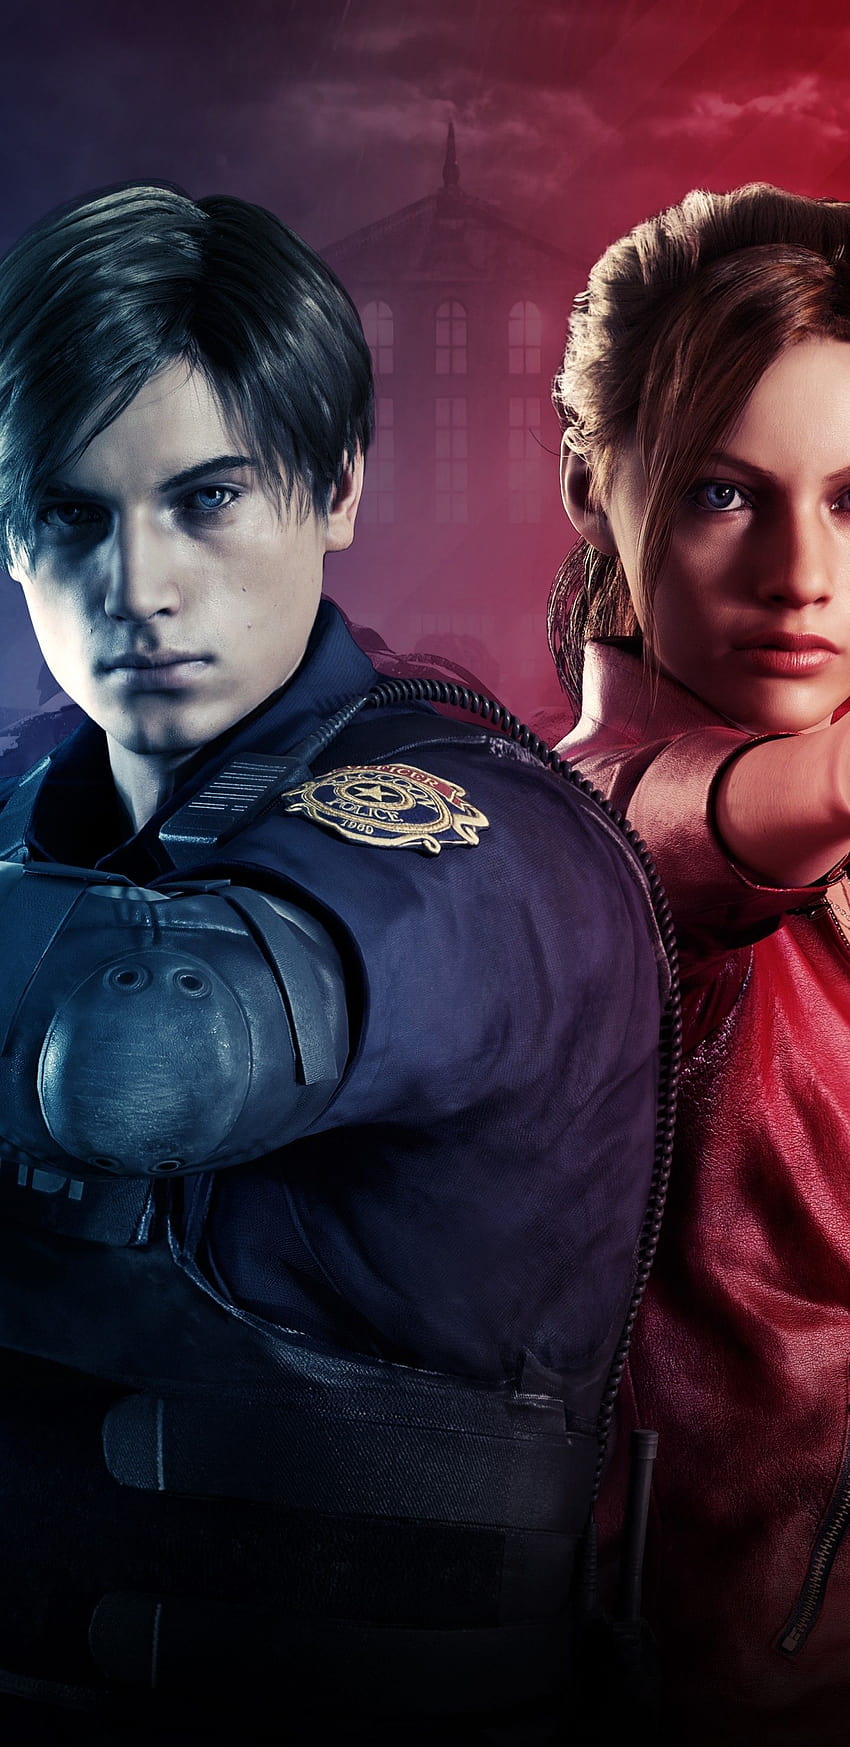 1440x2960 Resident Evil 2, Claire, Leon S. Kennedy, resident evil android HD phone wallpaper